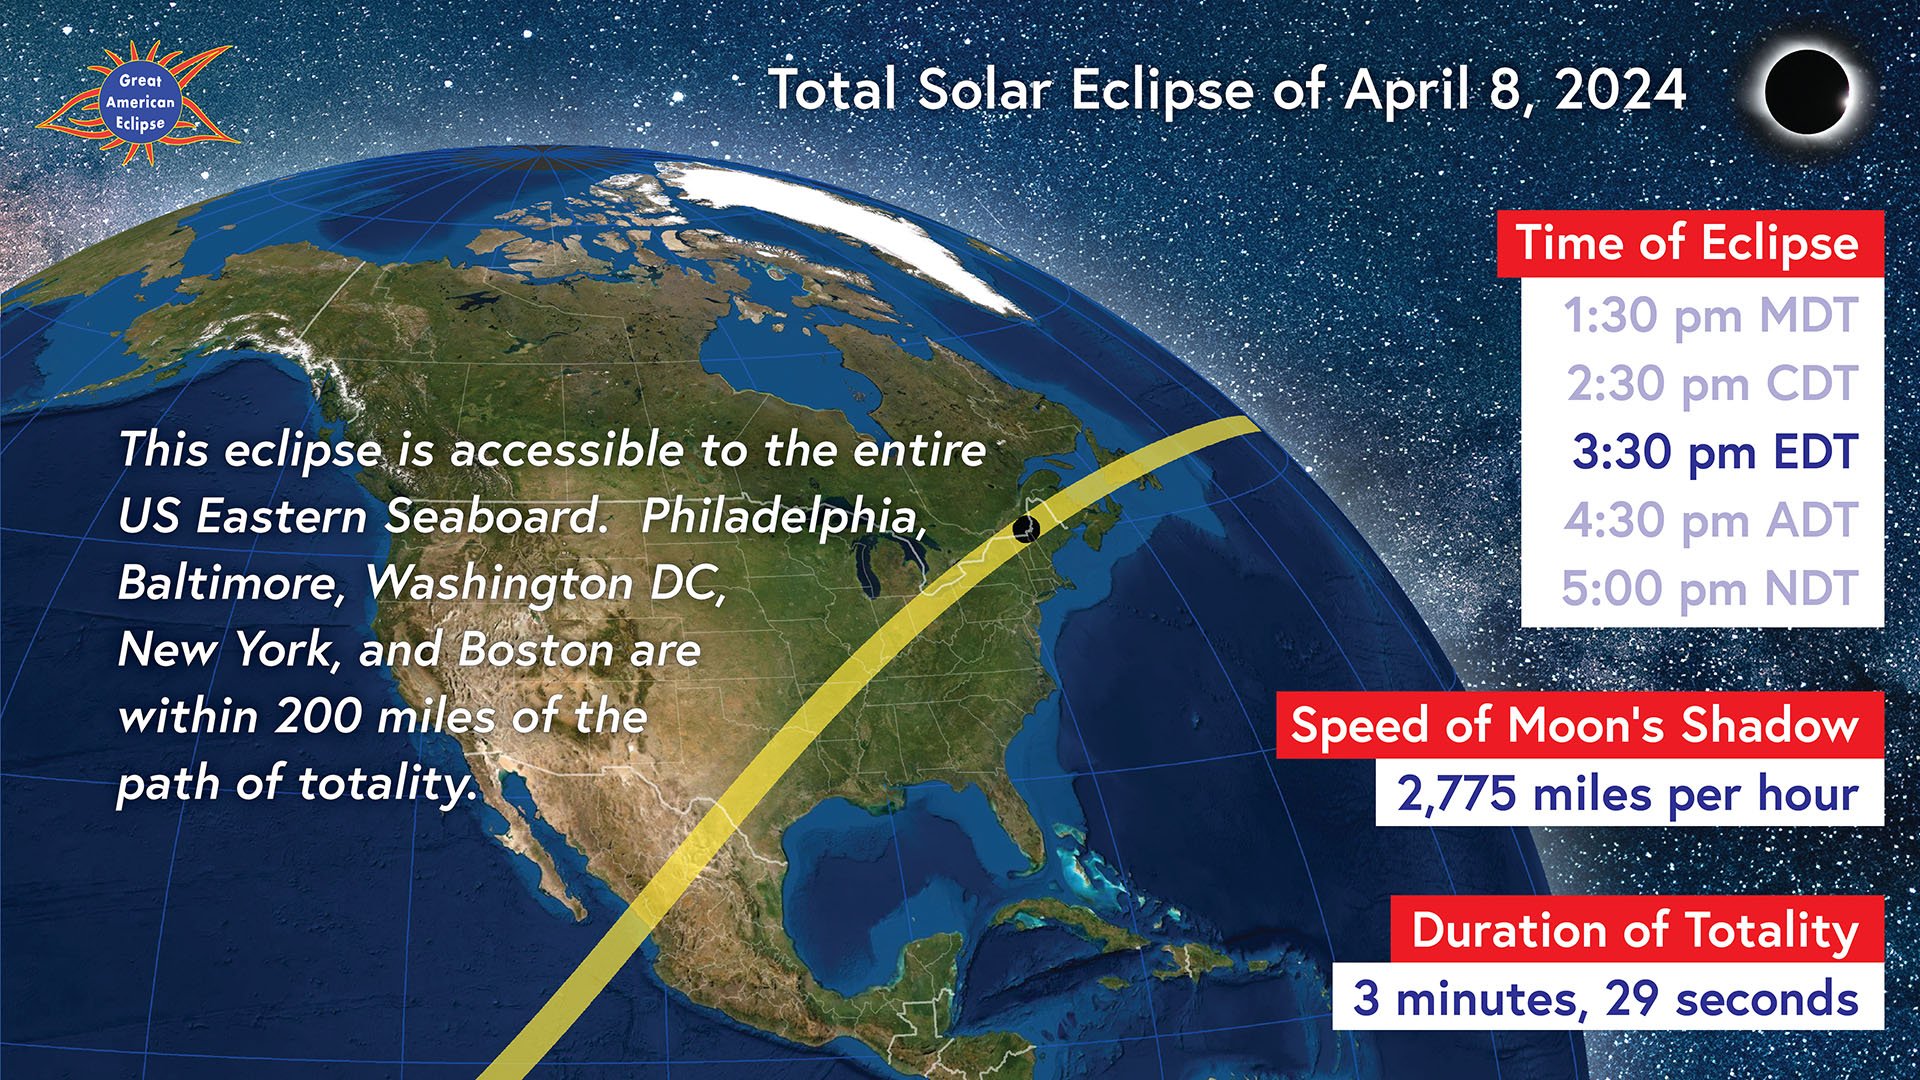 Total solar eclipse 6 years ago, next total eclipse in 2024